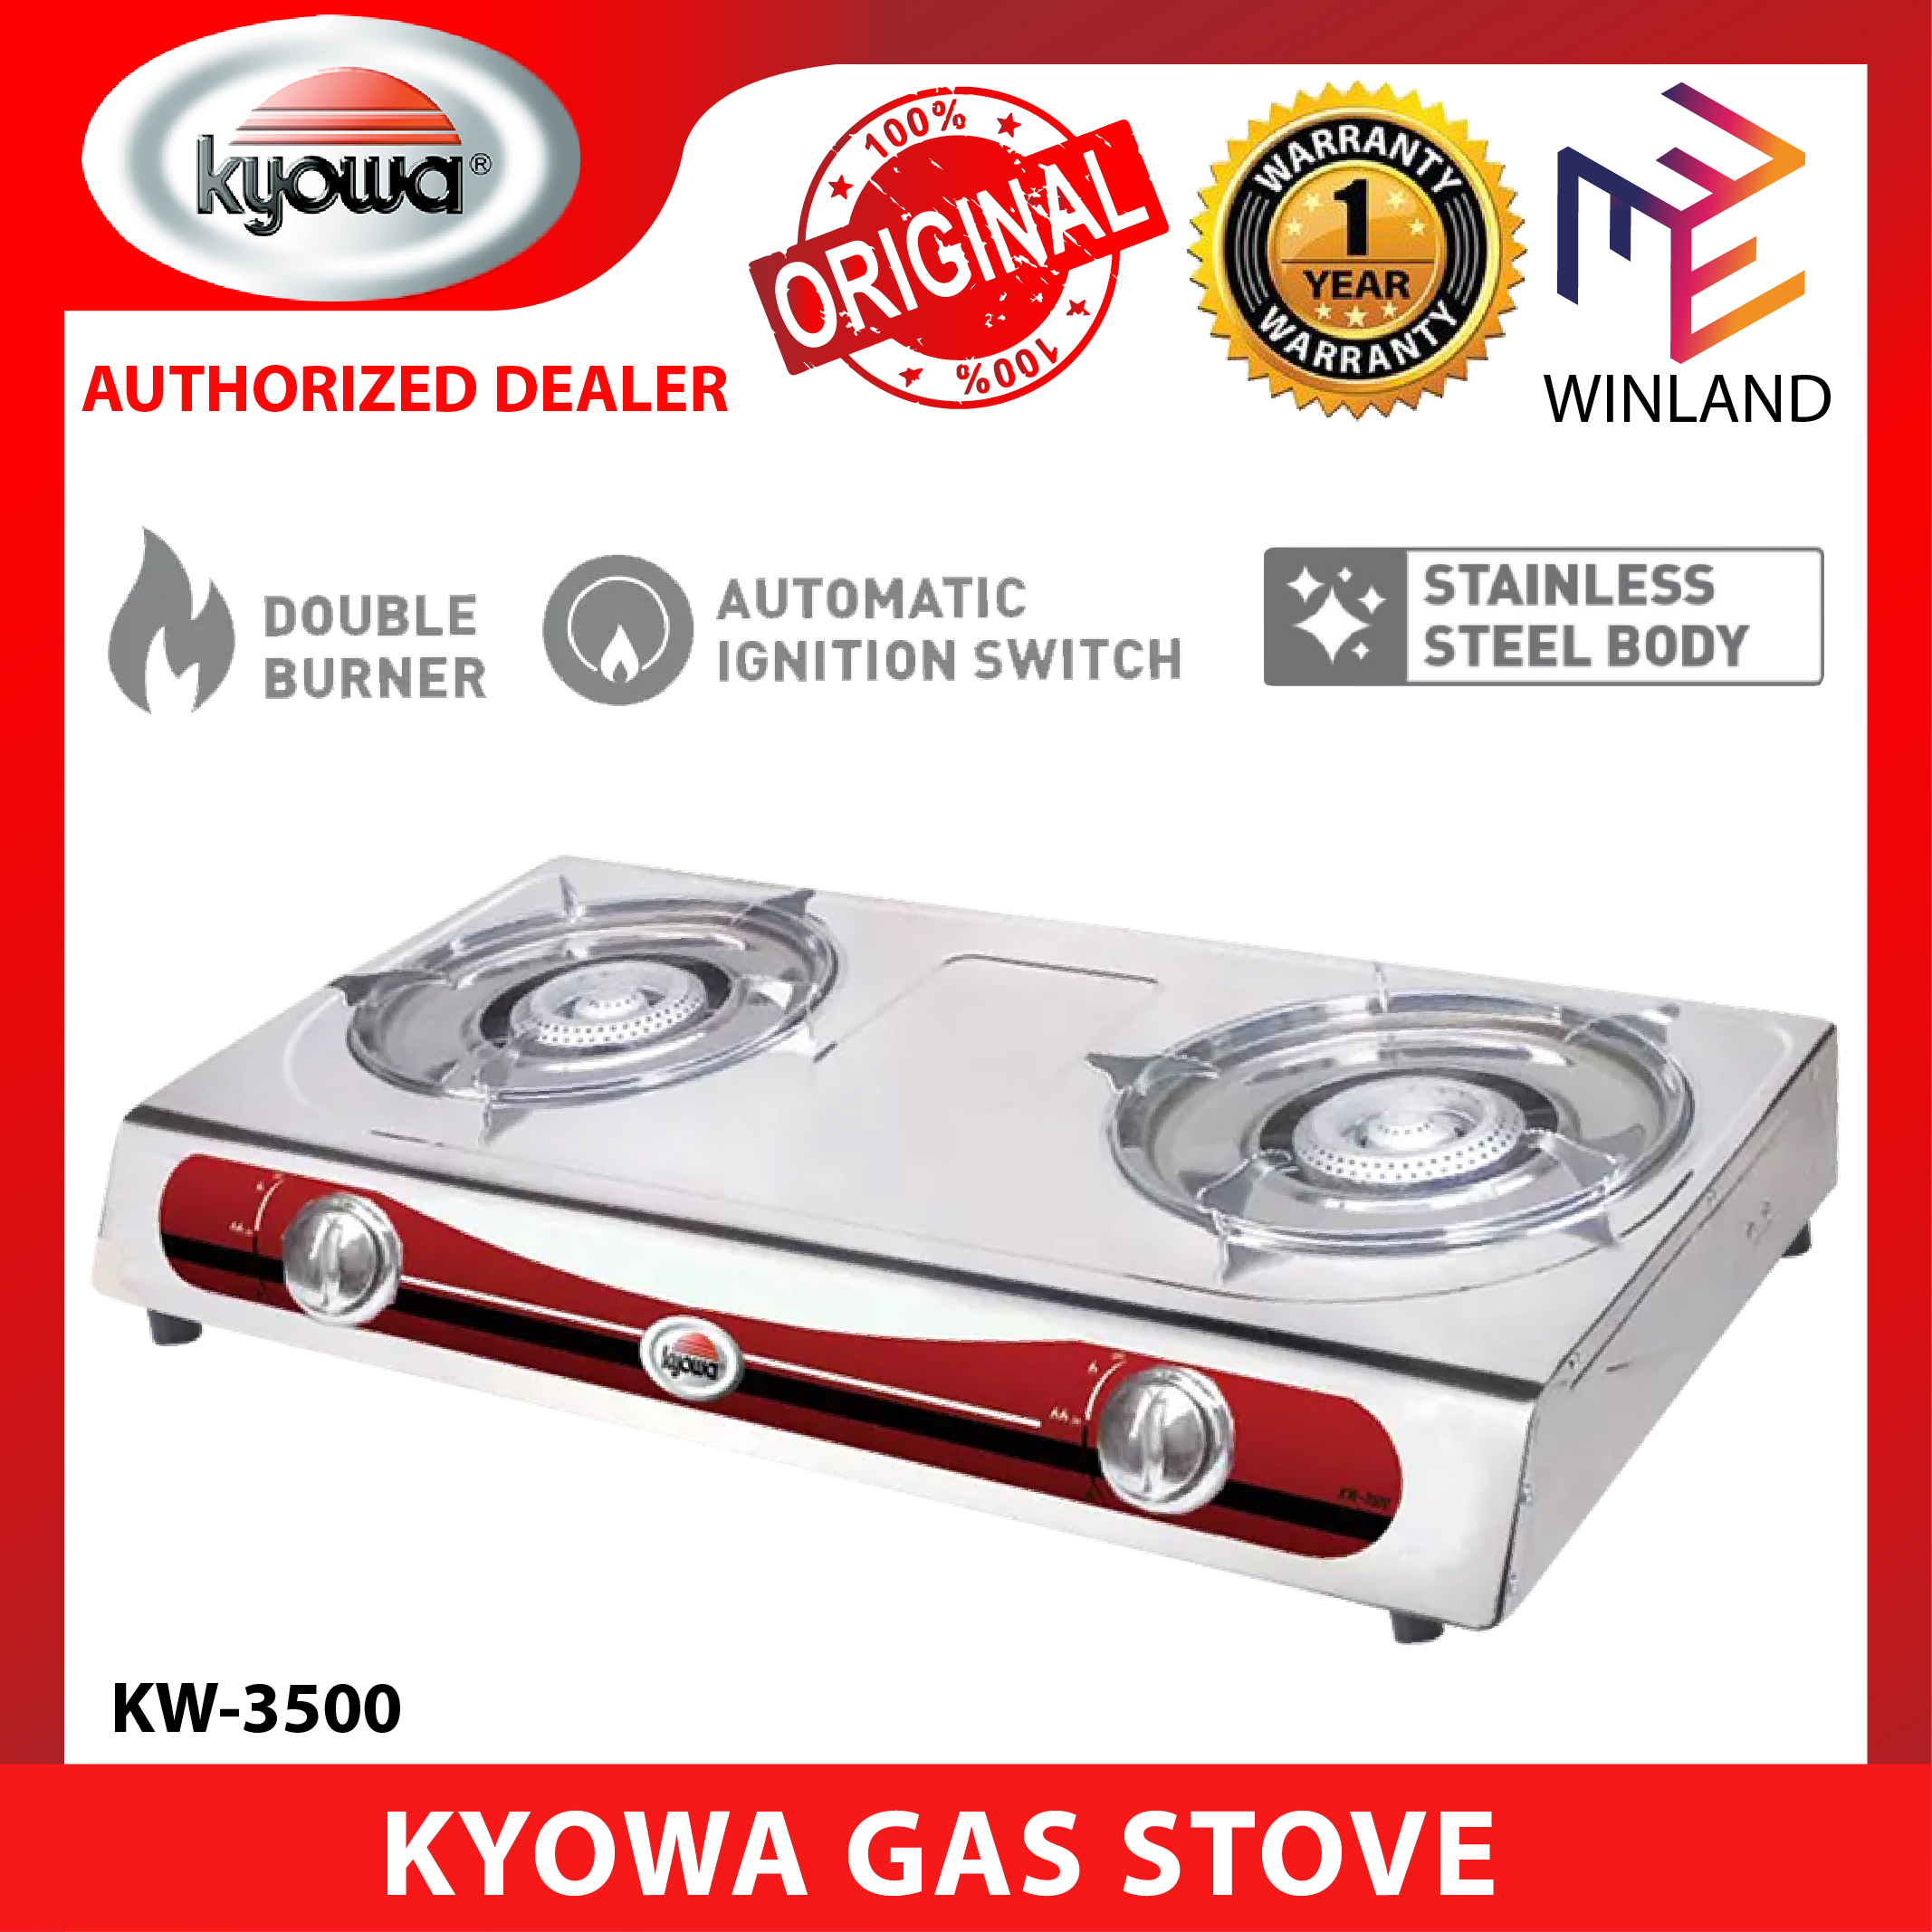 Winland Stainless Steel Double Burner Gas Stove, KW-3500